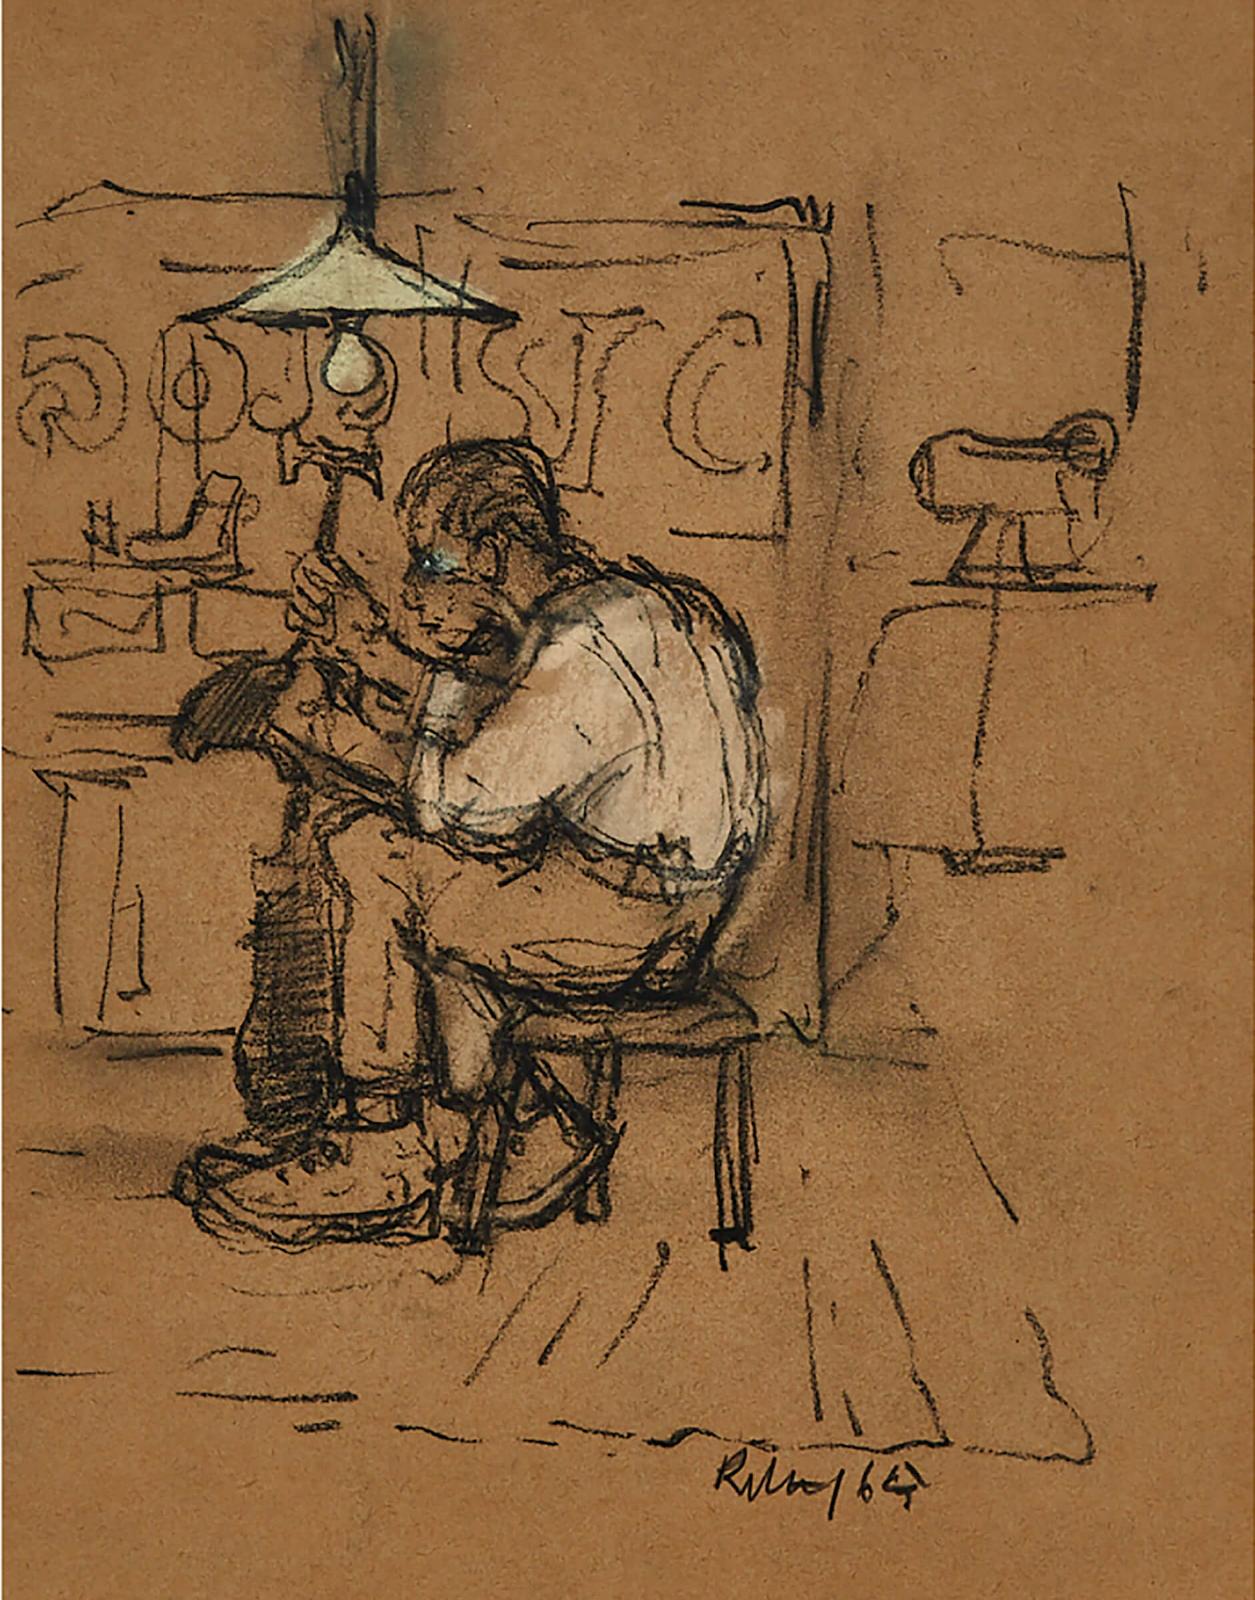 Harold Francis Riley (1934) - Manchester Working Class Cobbler, 1960; Chapel Nestled Among Trees